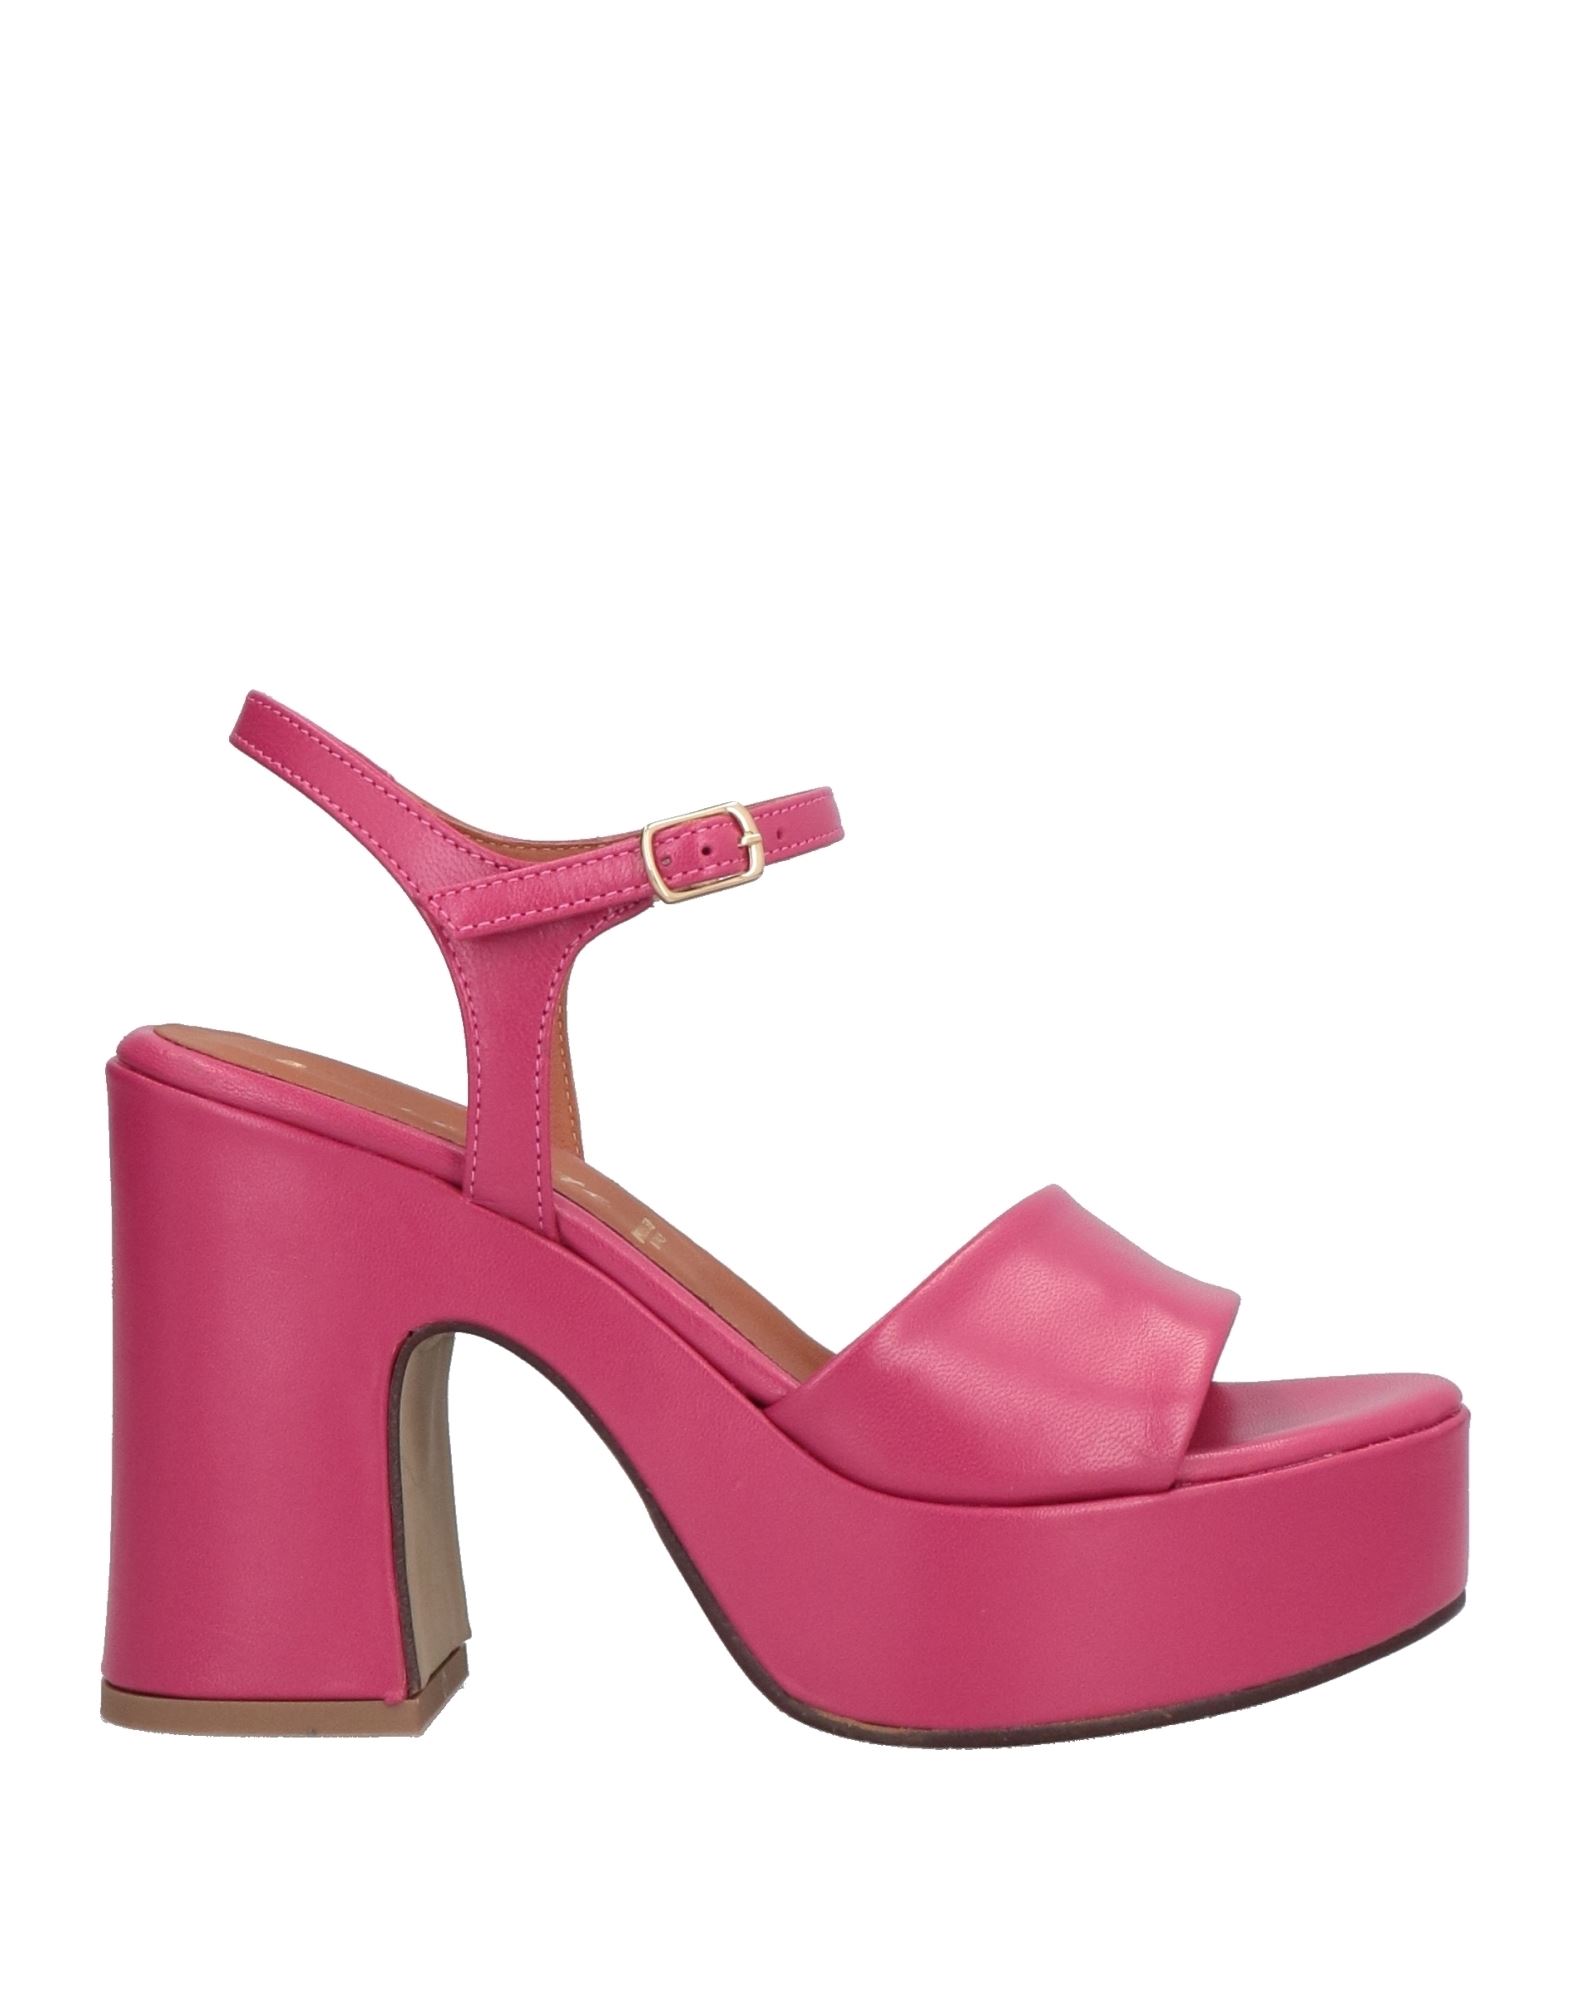 Le Pepite Sandals In Pink